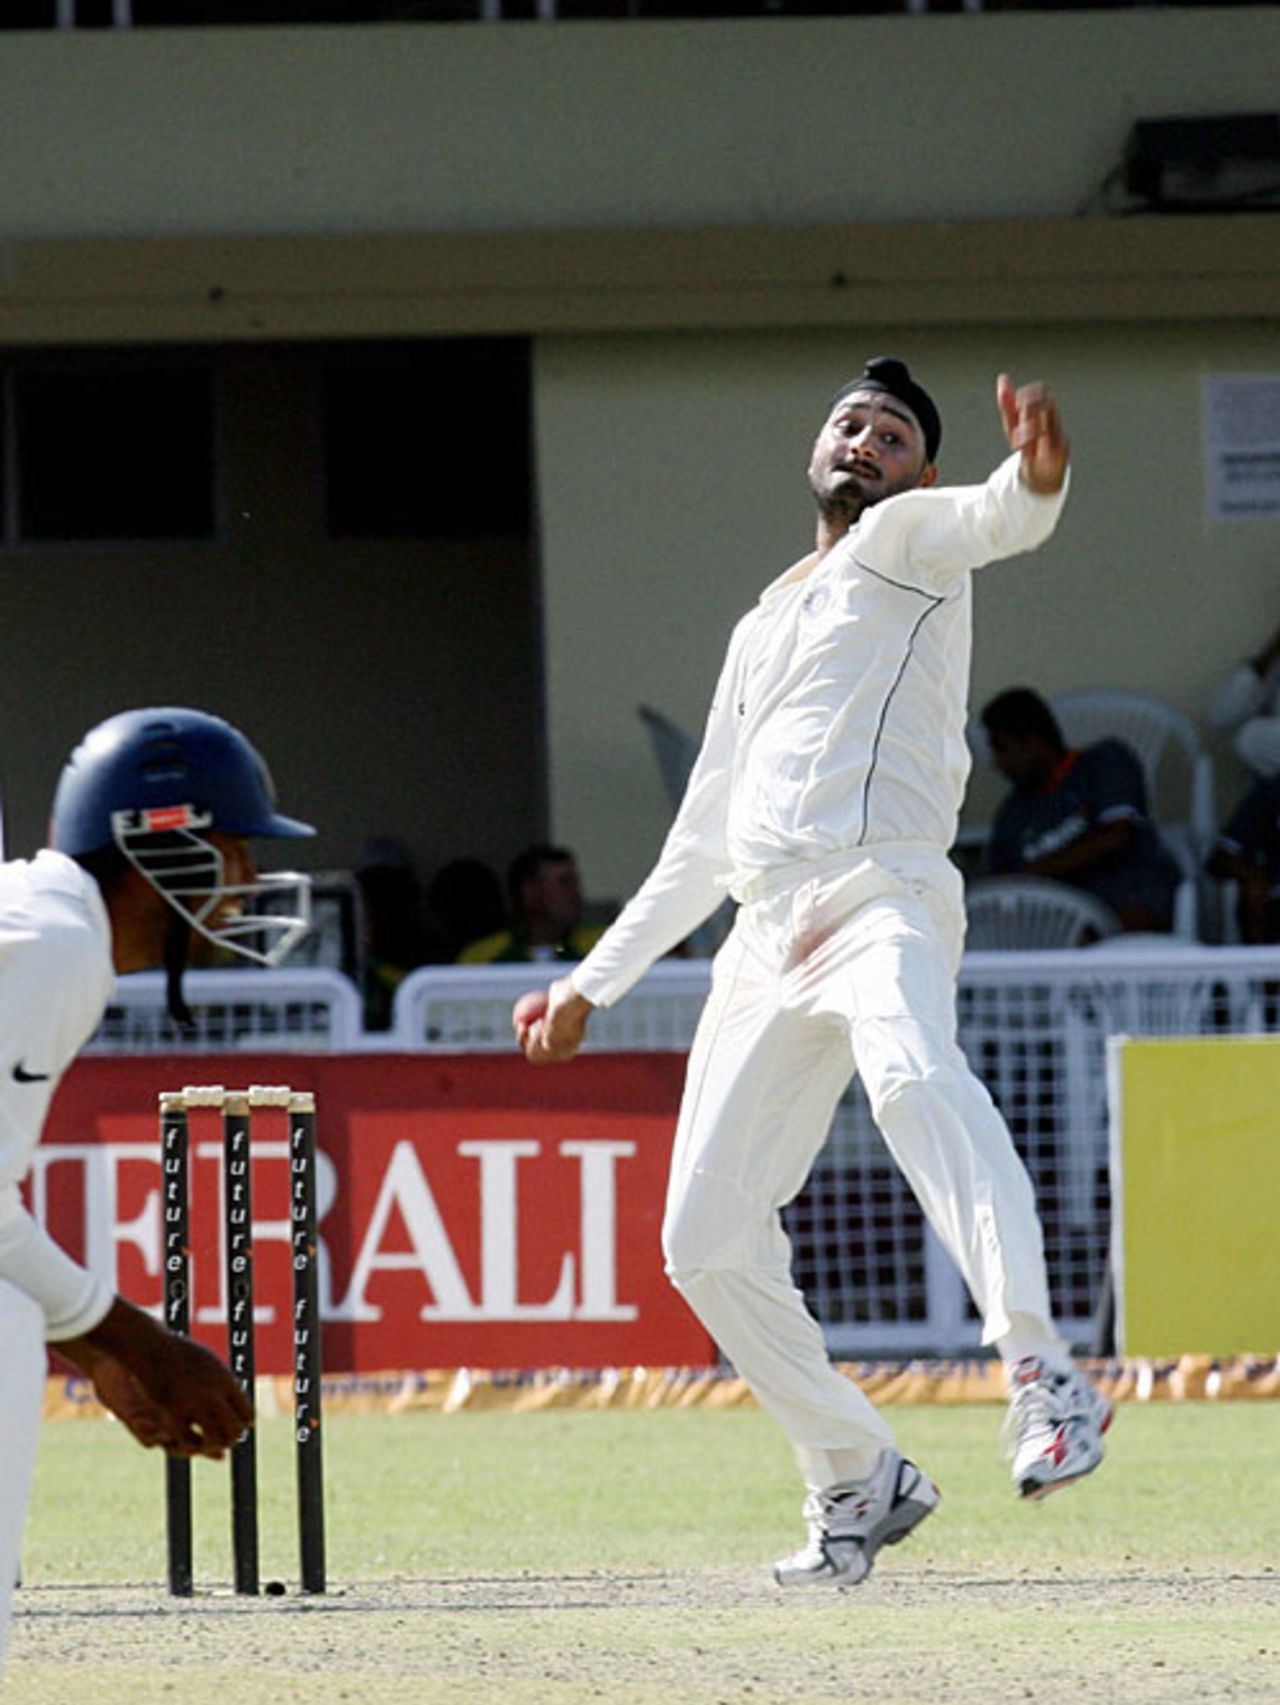 Harbhajan Singh picked up 4 for 44, India v South Africa, 3rd Test, Kanpur, 3rd day, April 13, 2008